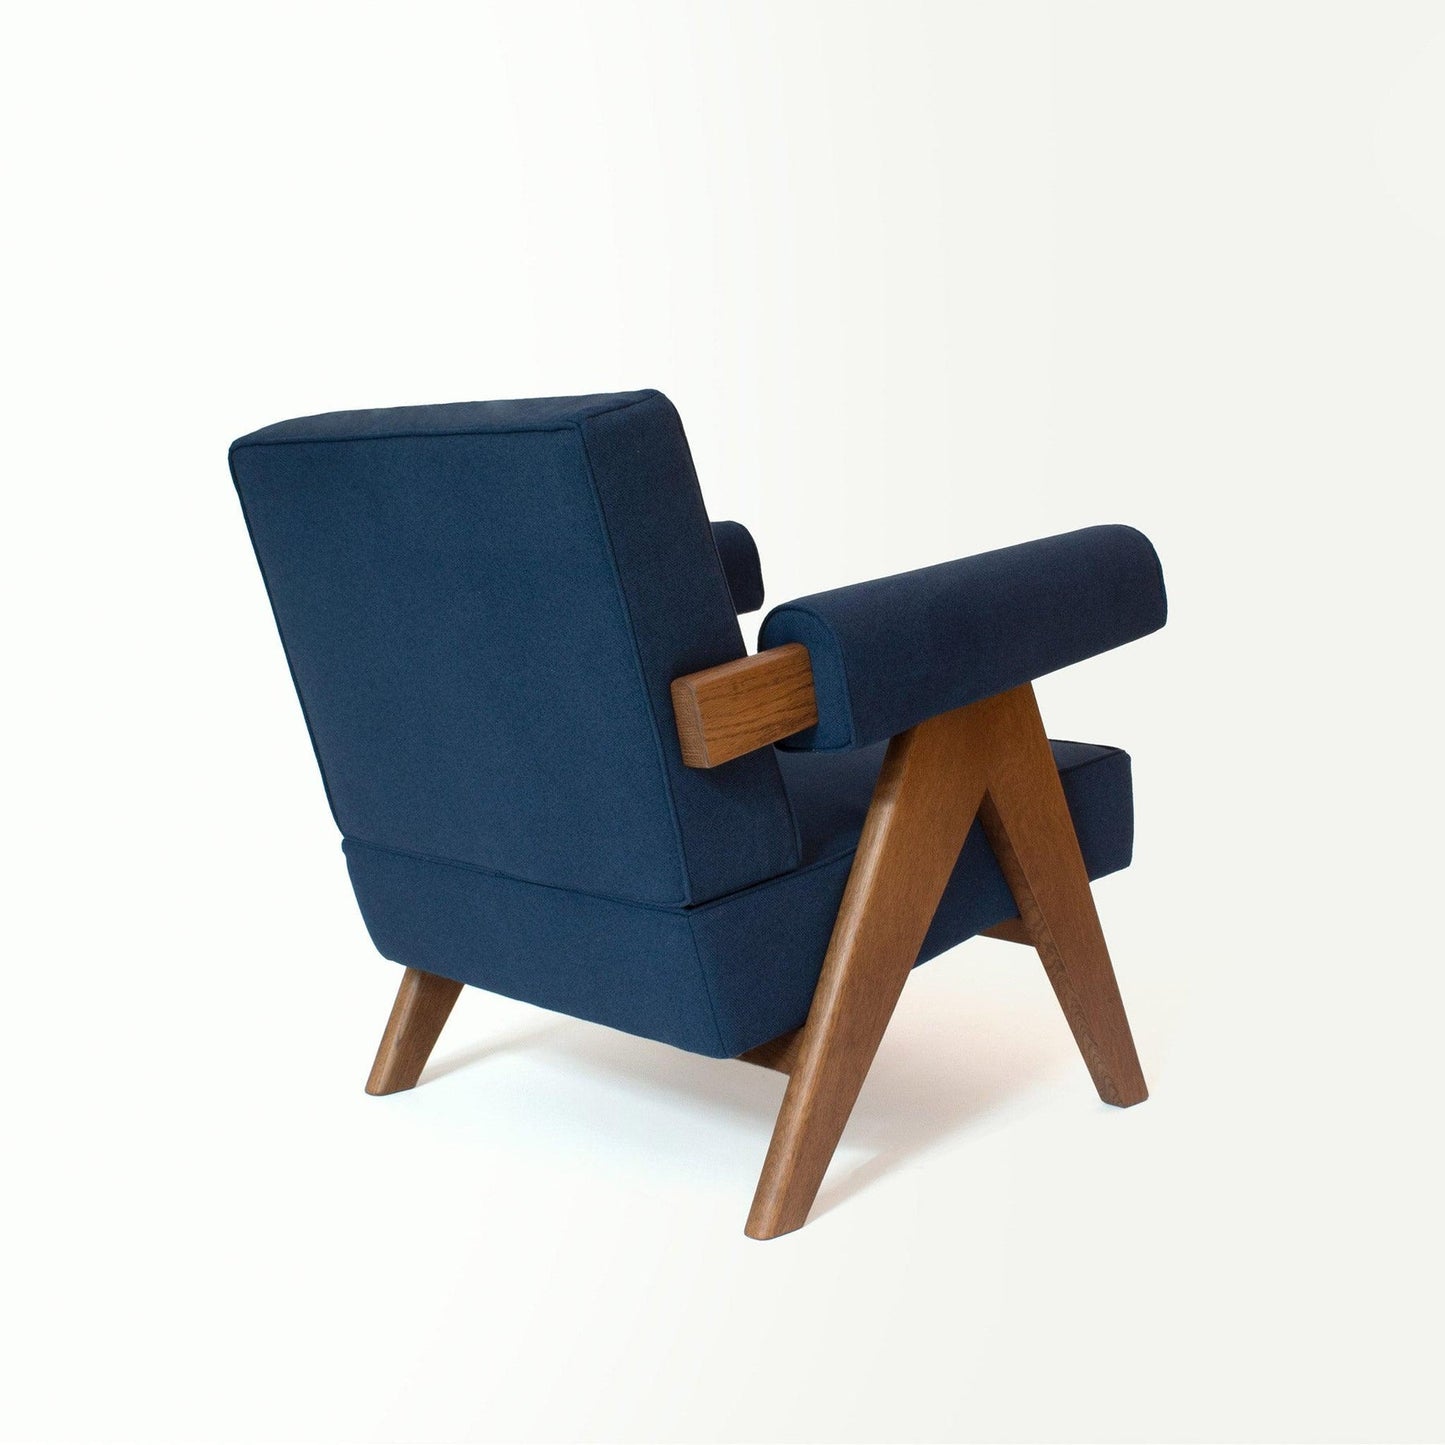 Pierre Jeanneret, upholstered easy chair